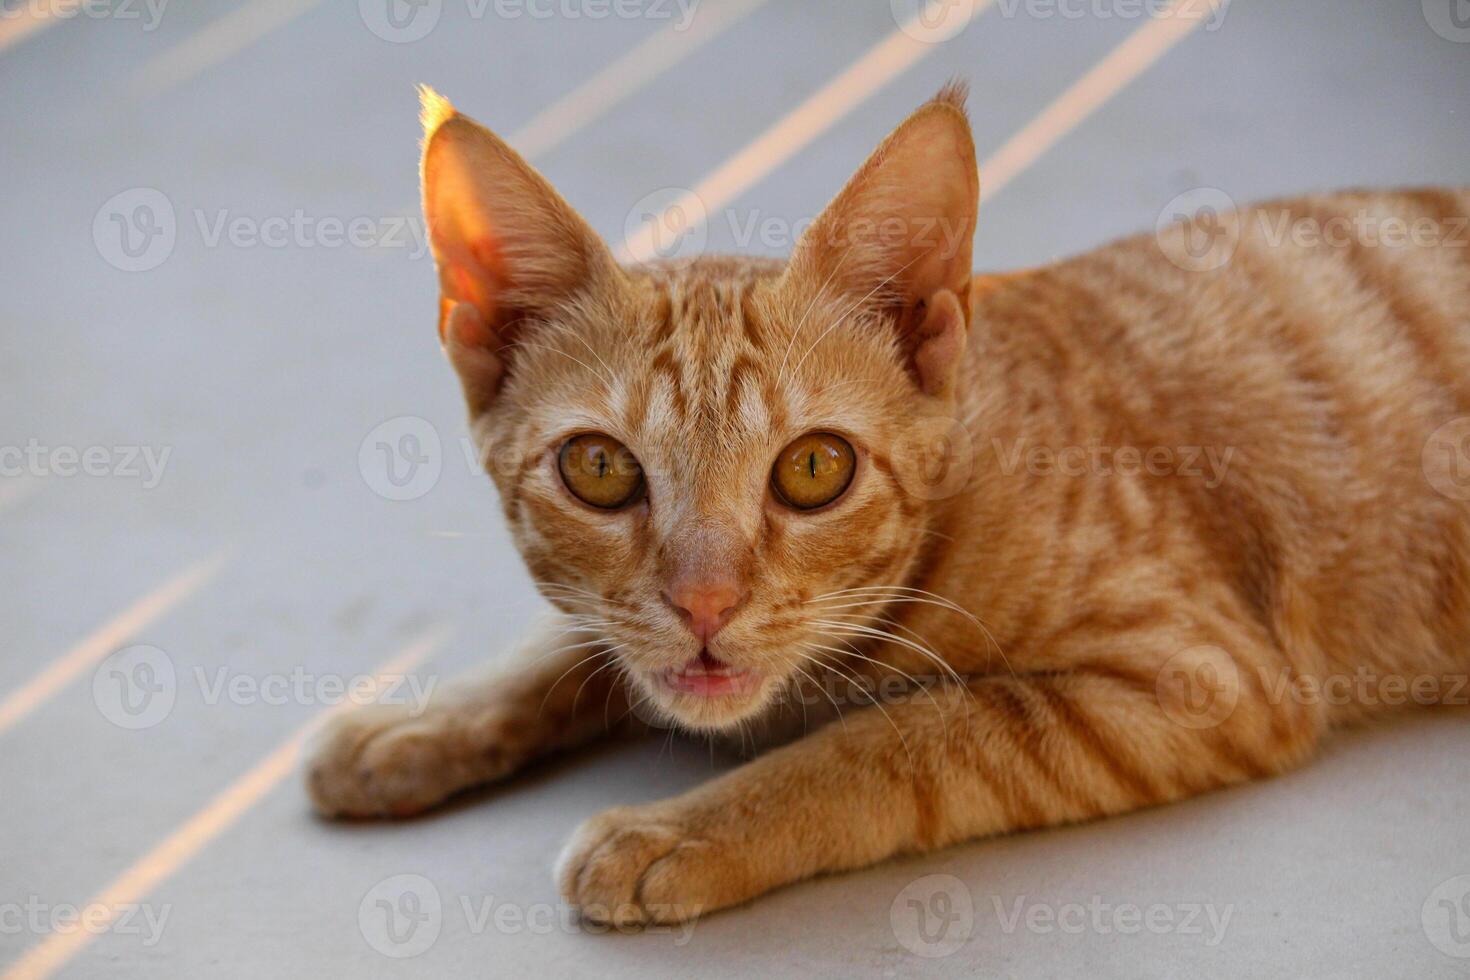 An Orange or Red Cat photo